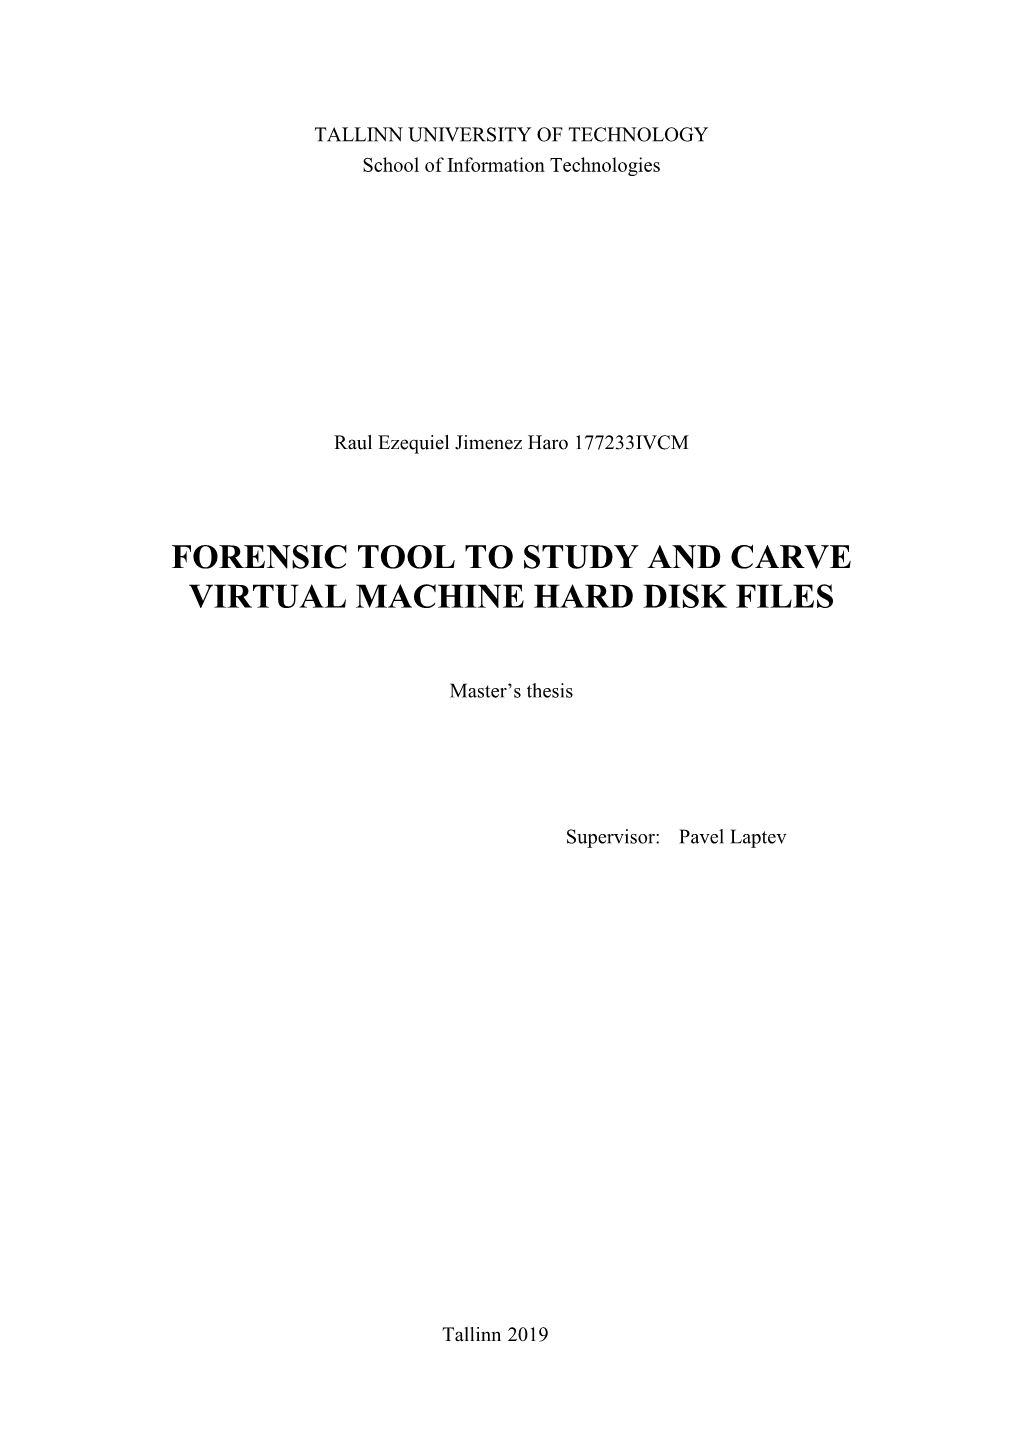 Forensic Tool to Study and Carve Virtual Machine Hard Disk Files